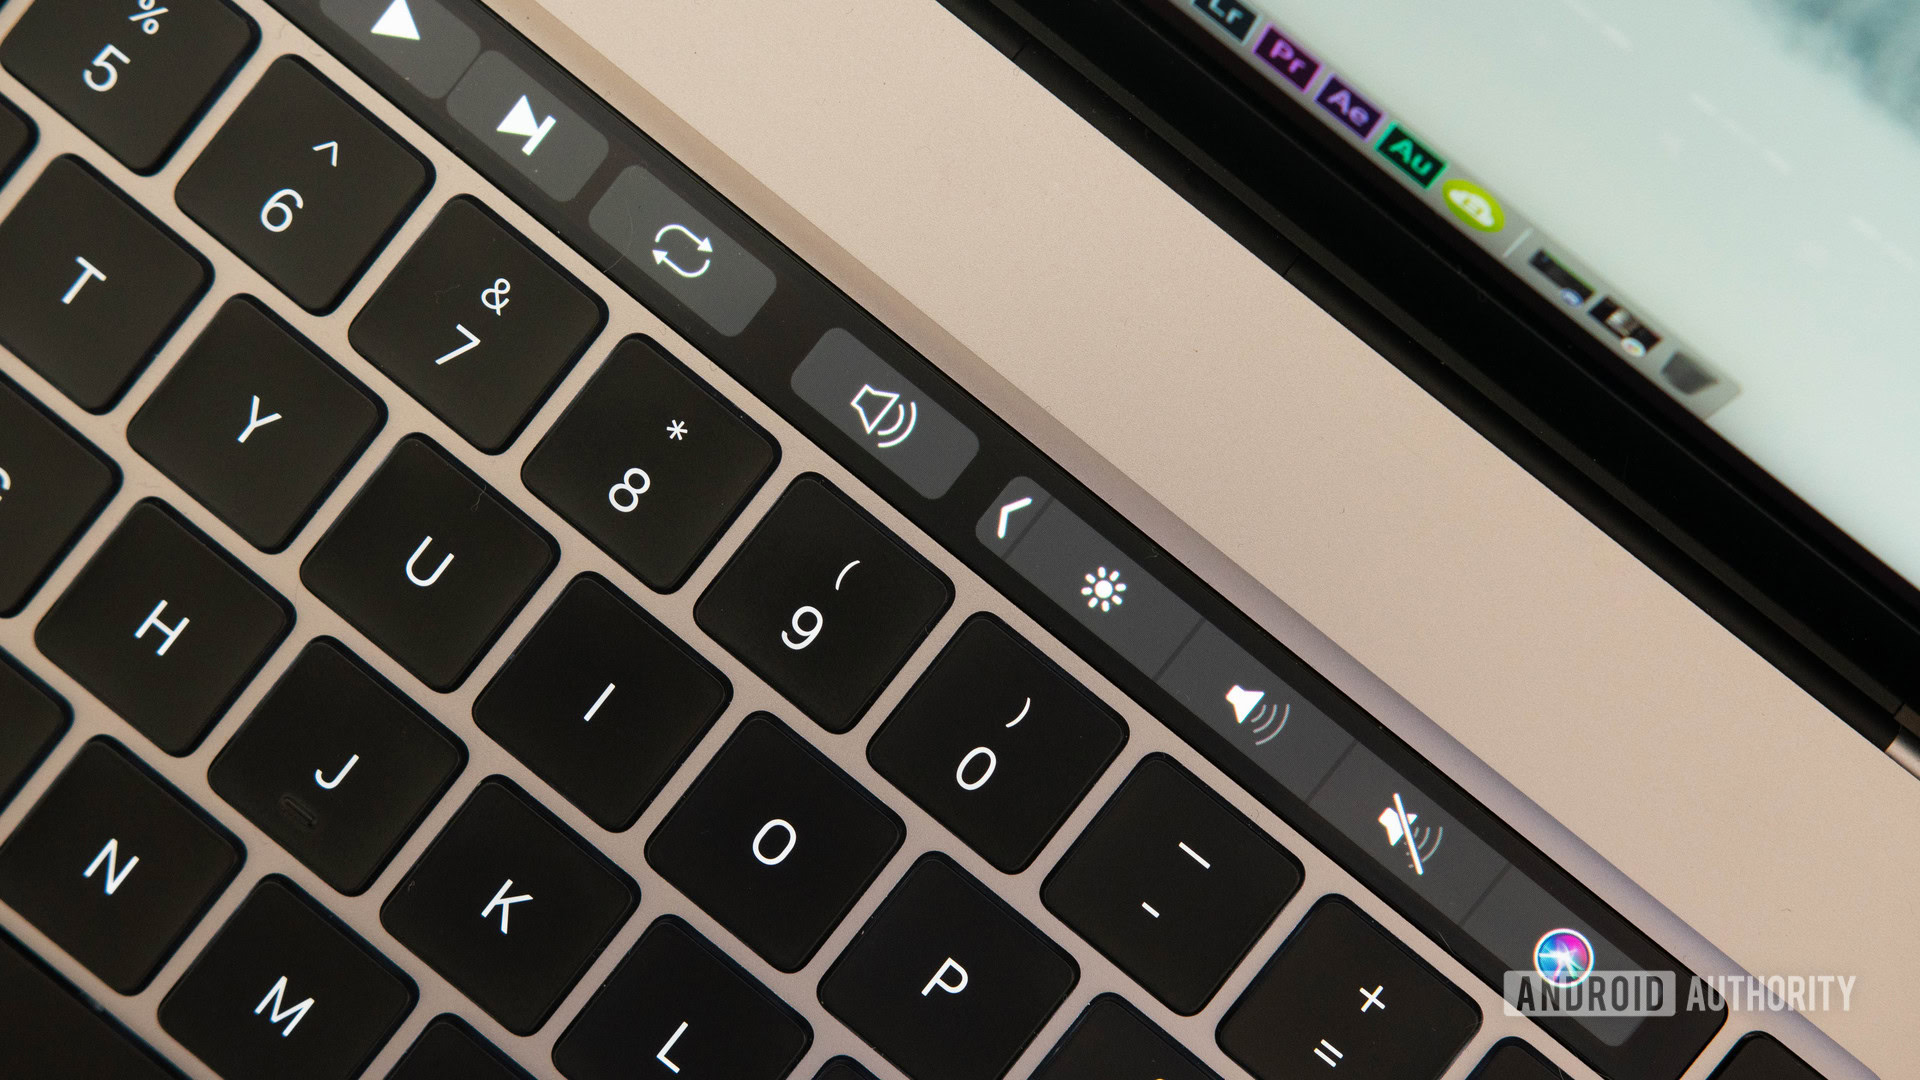 Apple Expected to Kill the MacBook Pro's Touch Bar This Year - MacRumors